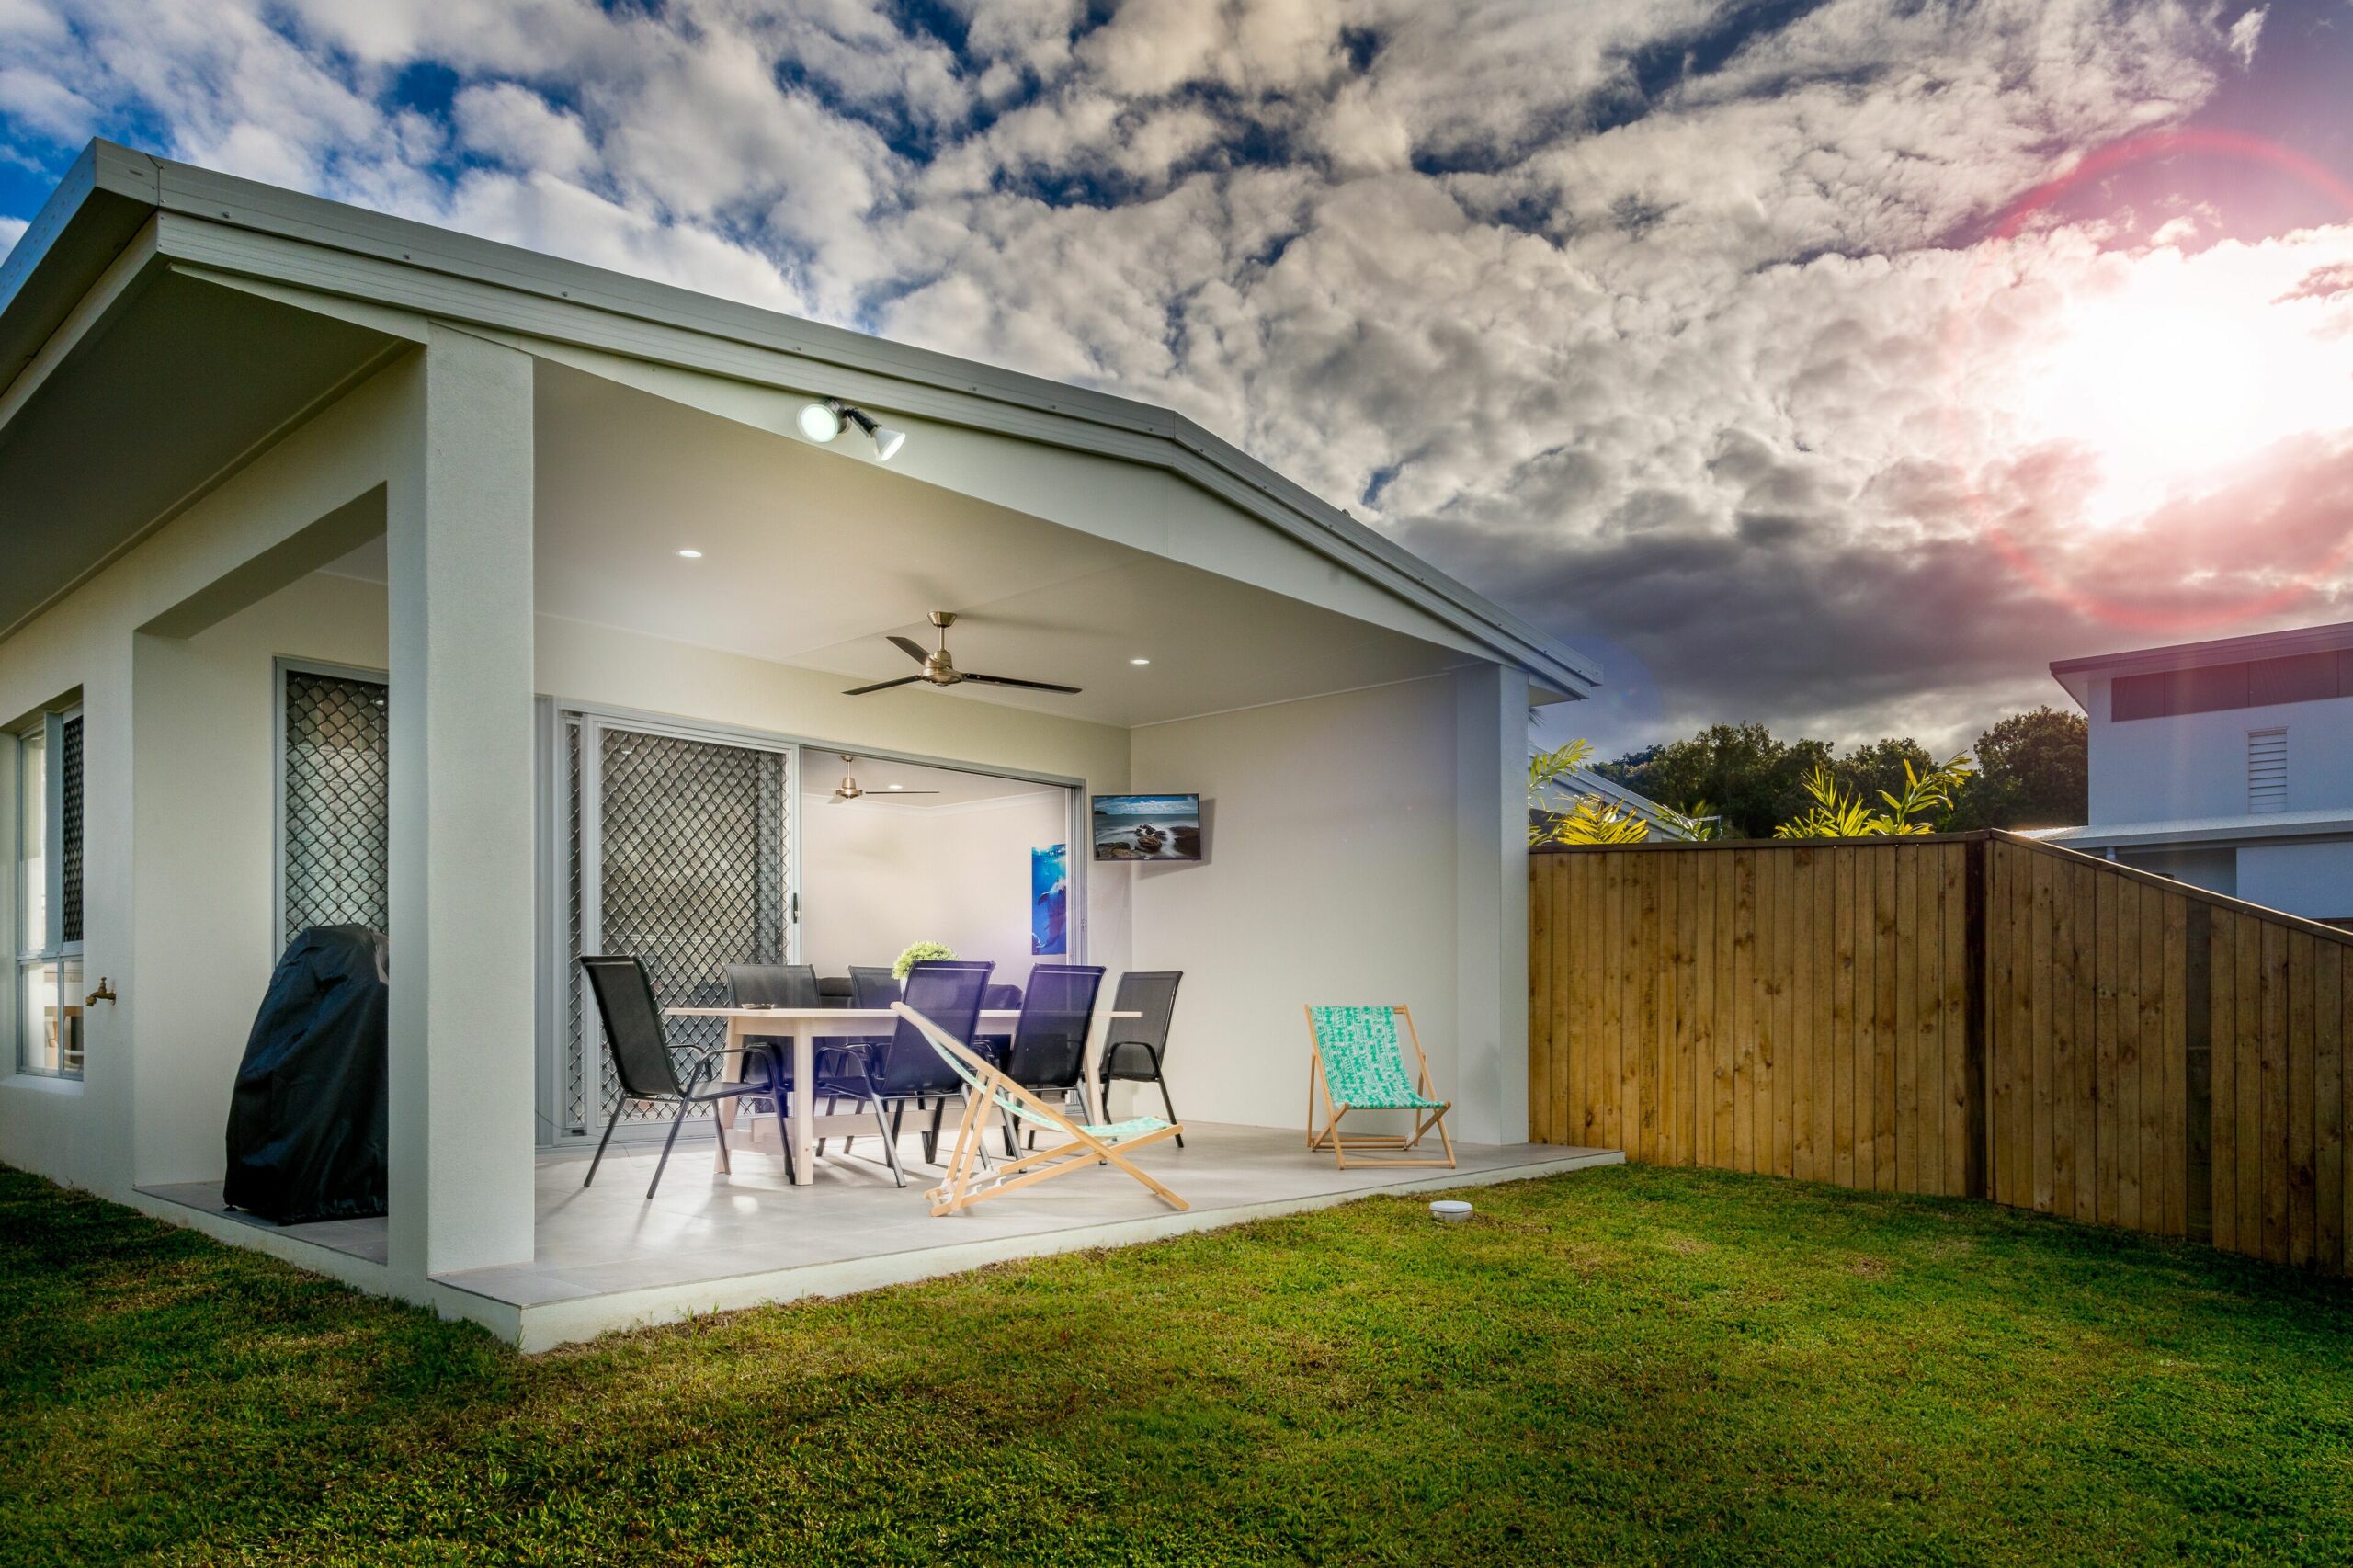 New Lakeside Villa at Blue Lagoon, Trinity Beach With Tennis Court and Lap Pool